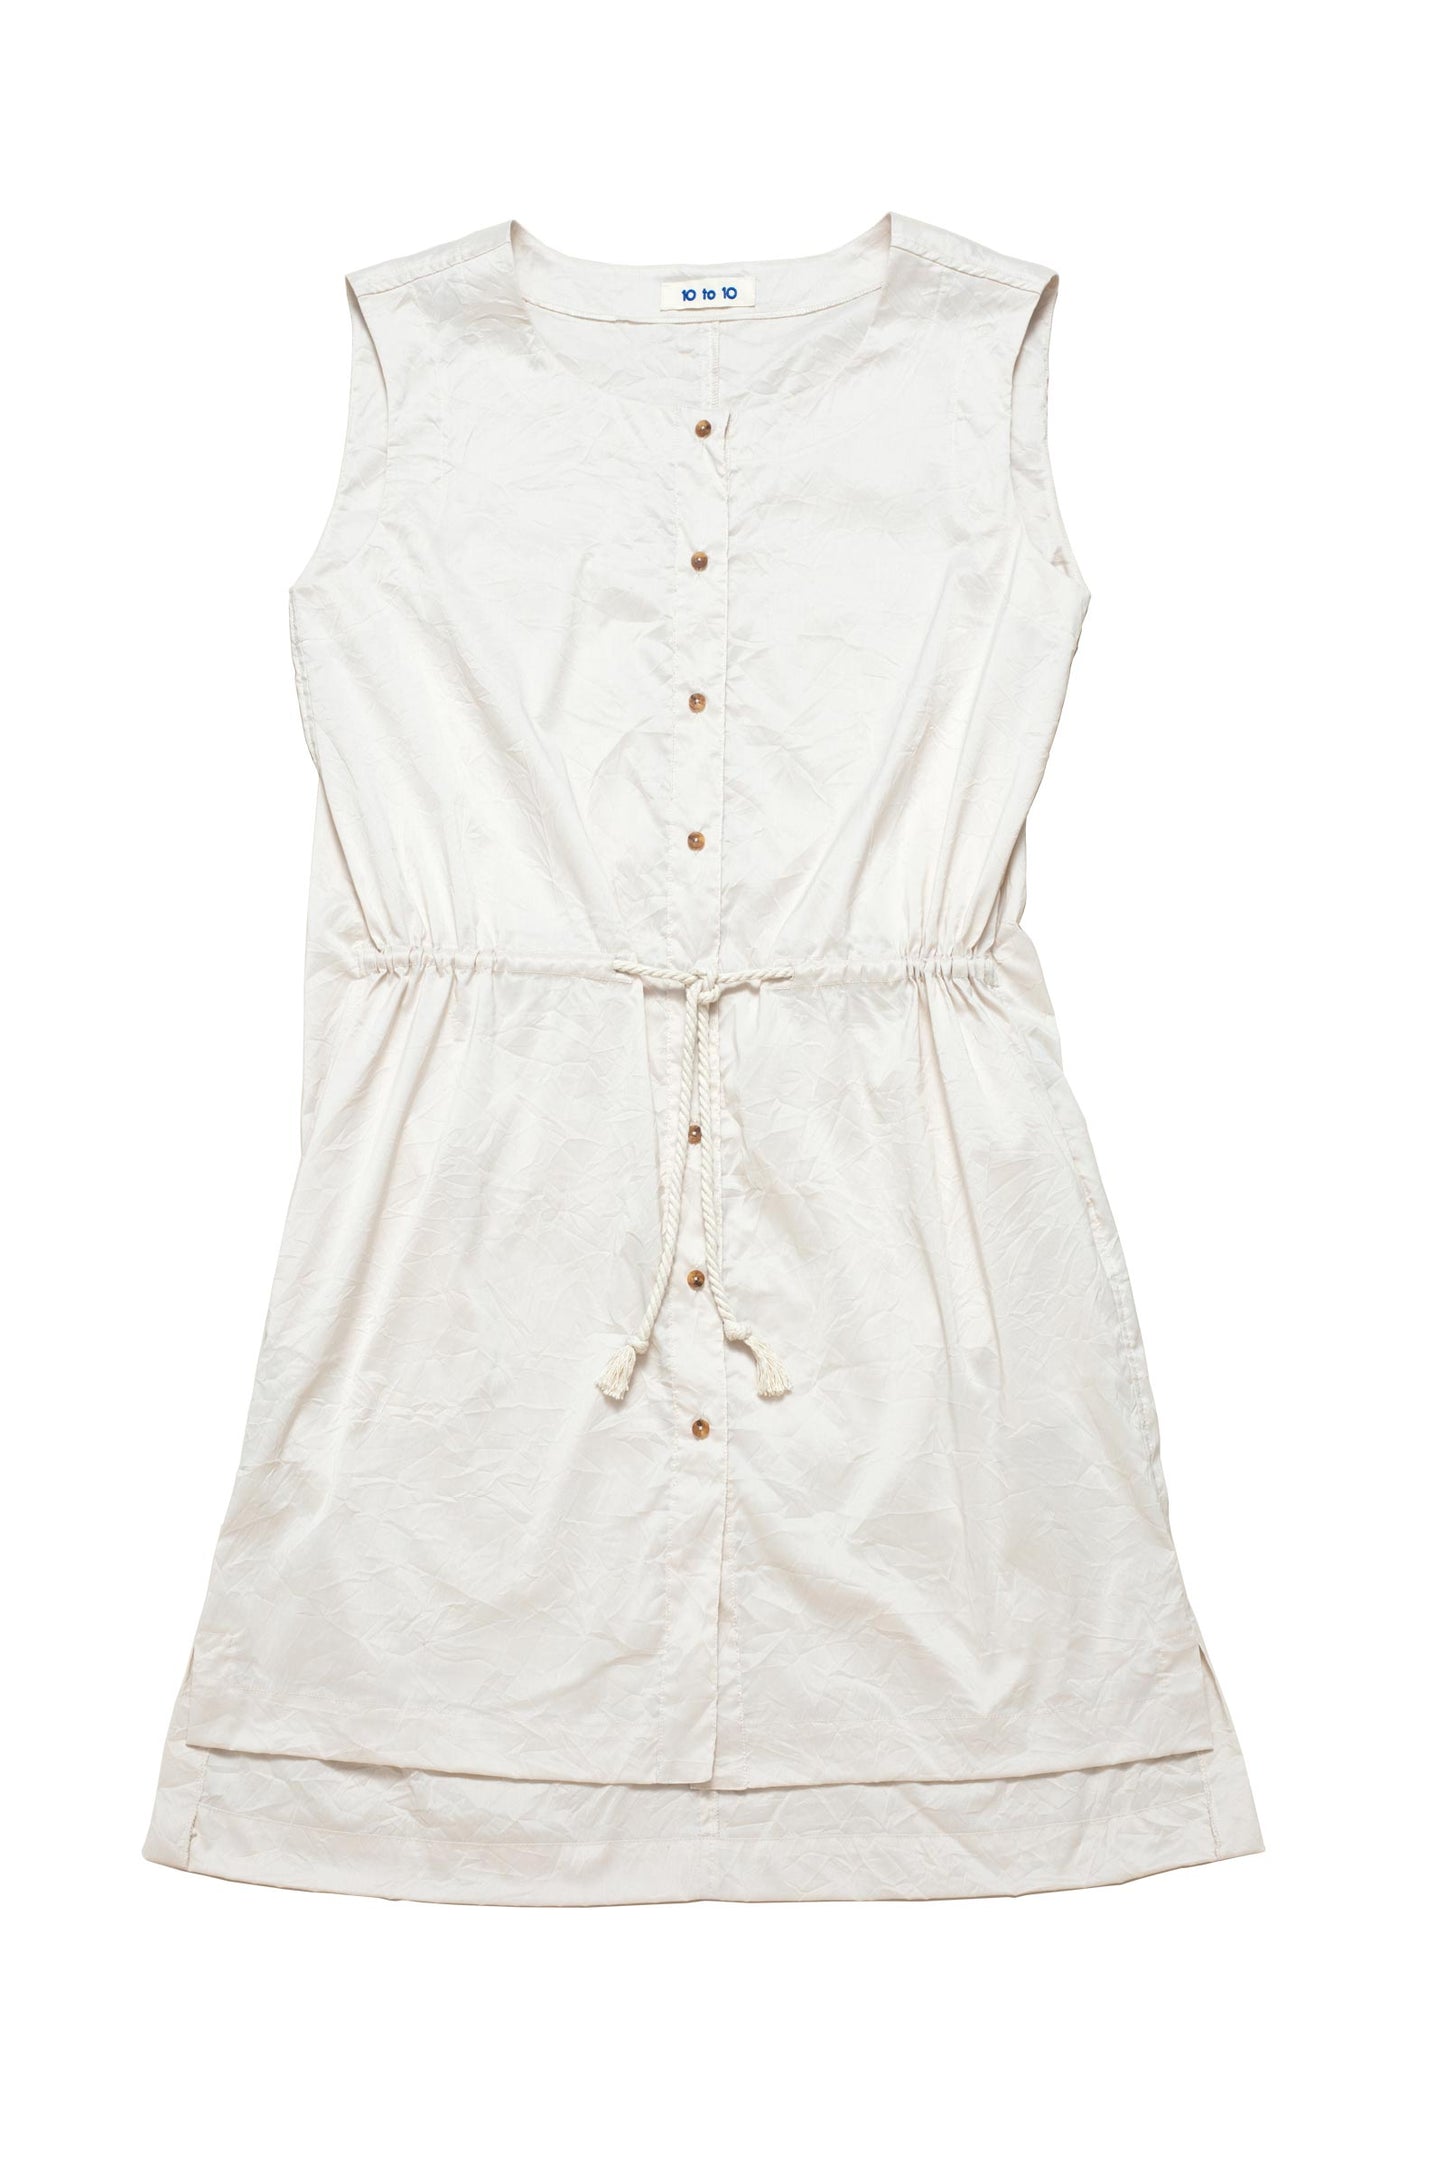 10 to 10 wrinkled cotton beach dress